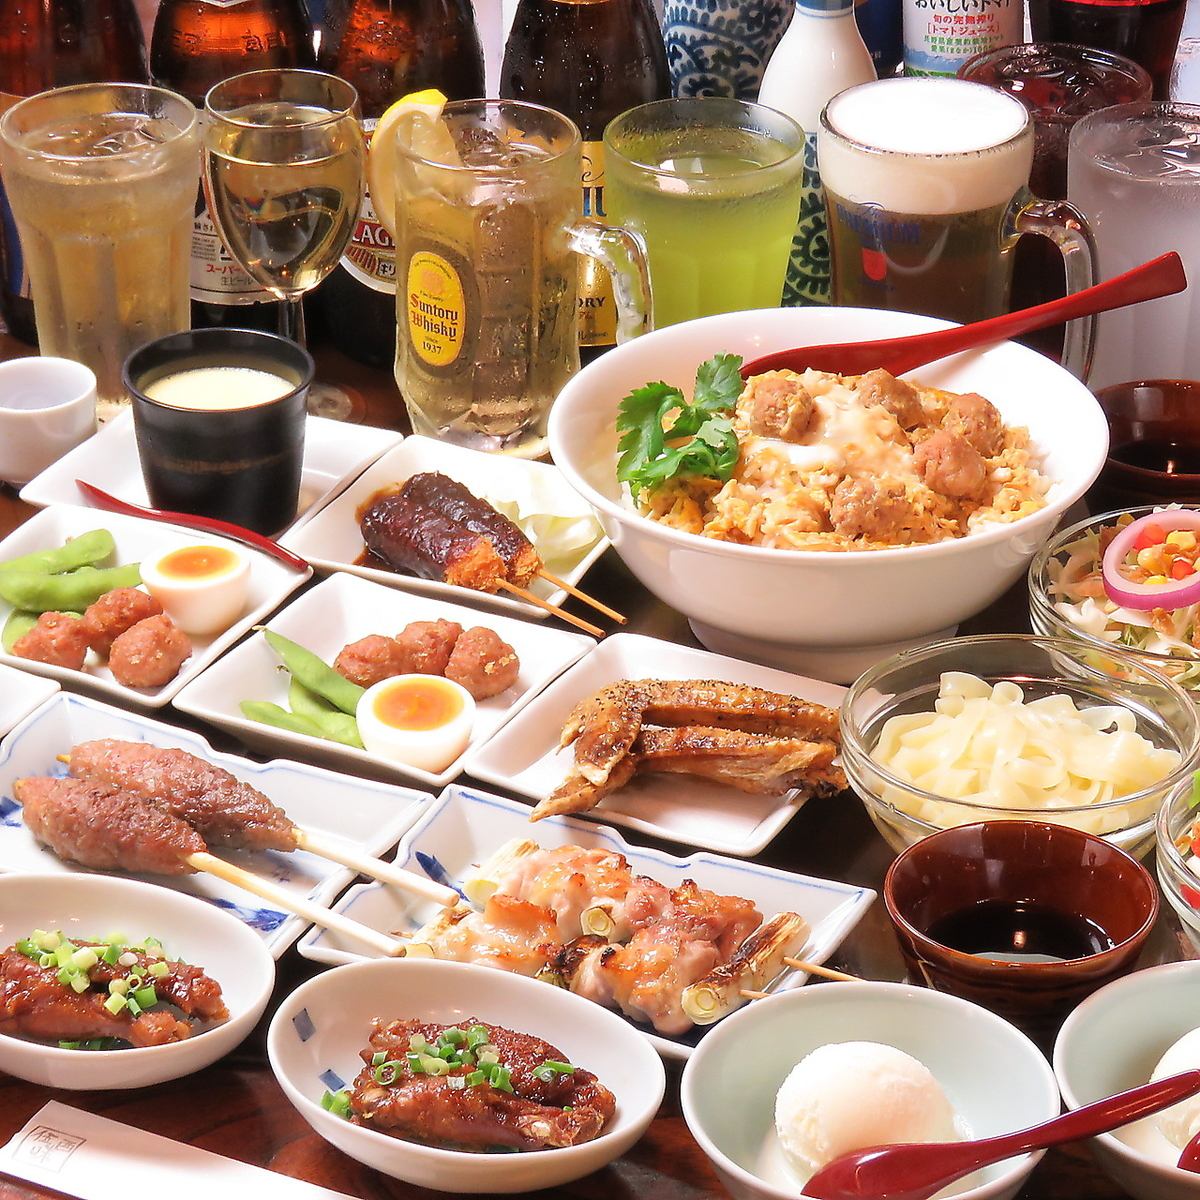 The Nagoya Cochin course is 3900 yen! All-you-can-drink is also great!